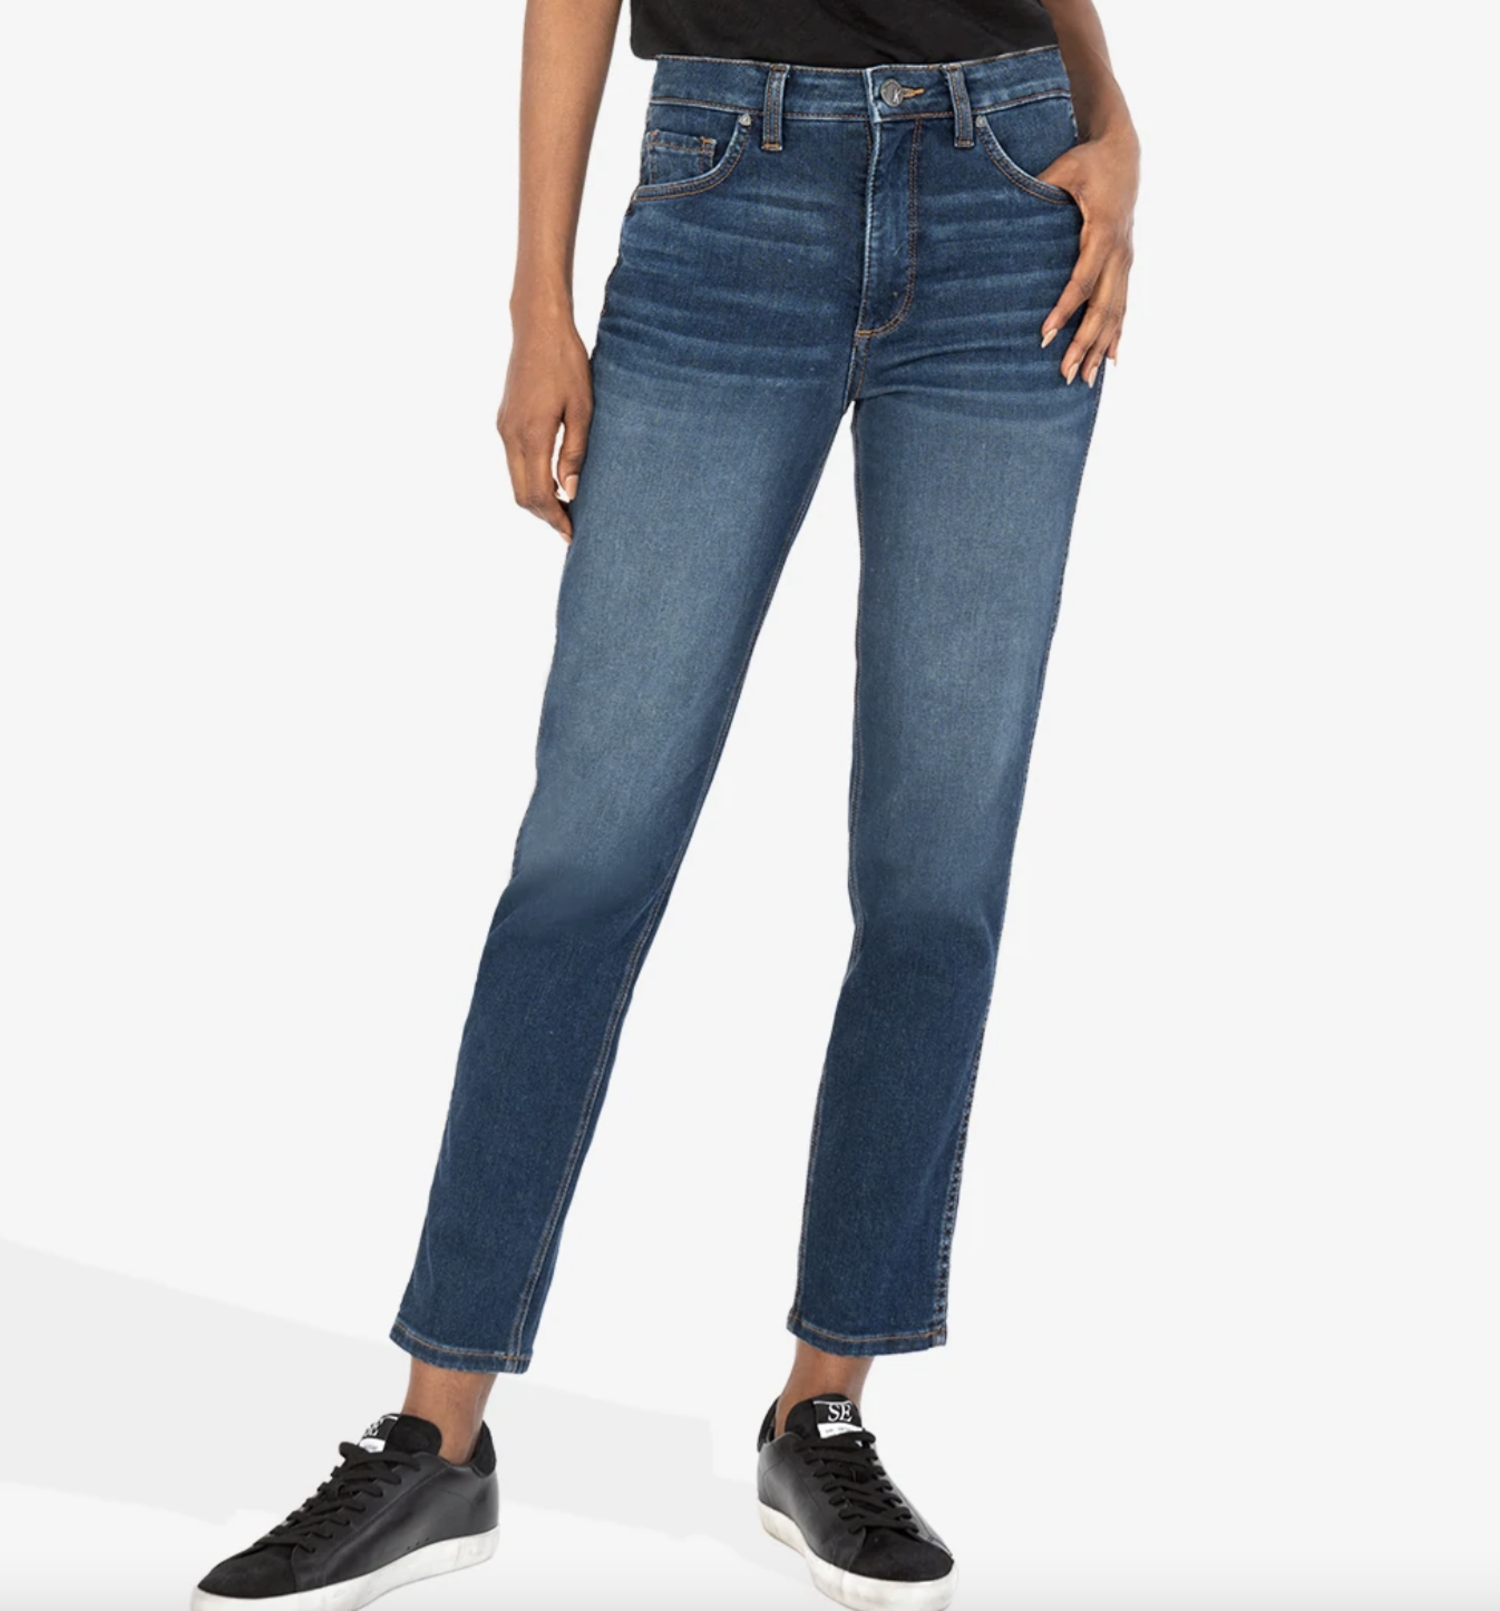 KUT from the Kloth Naomi High Waist Ankle Slim Jeans